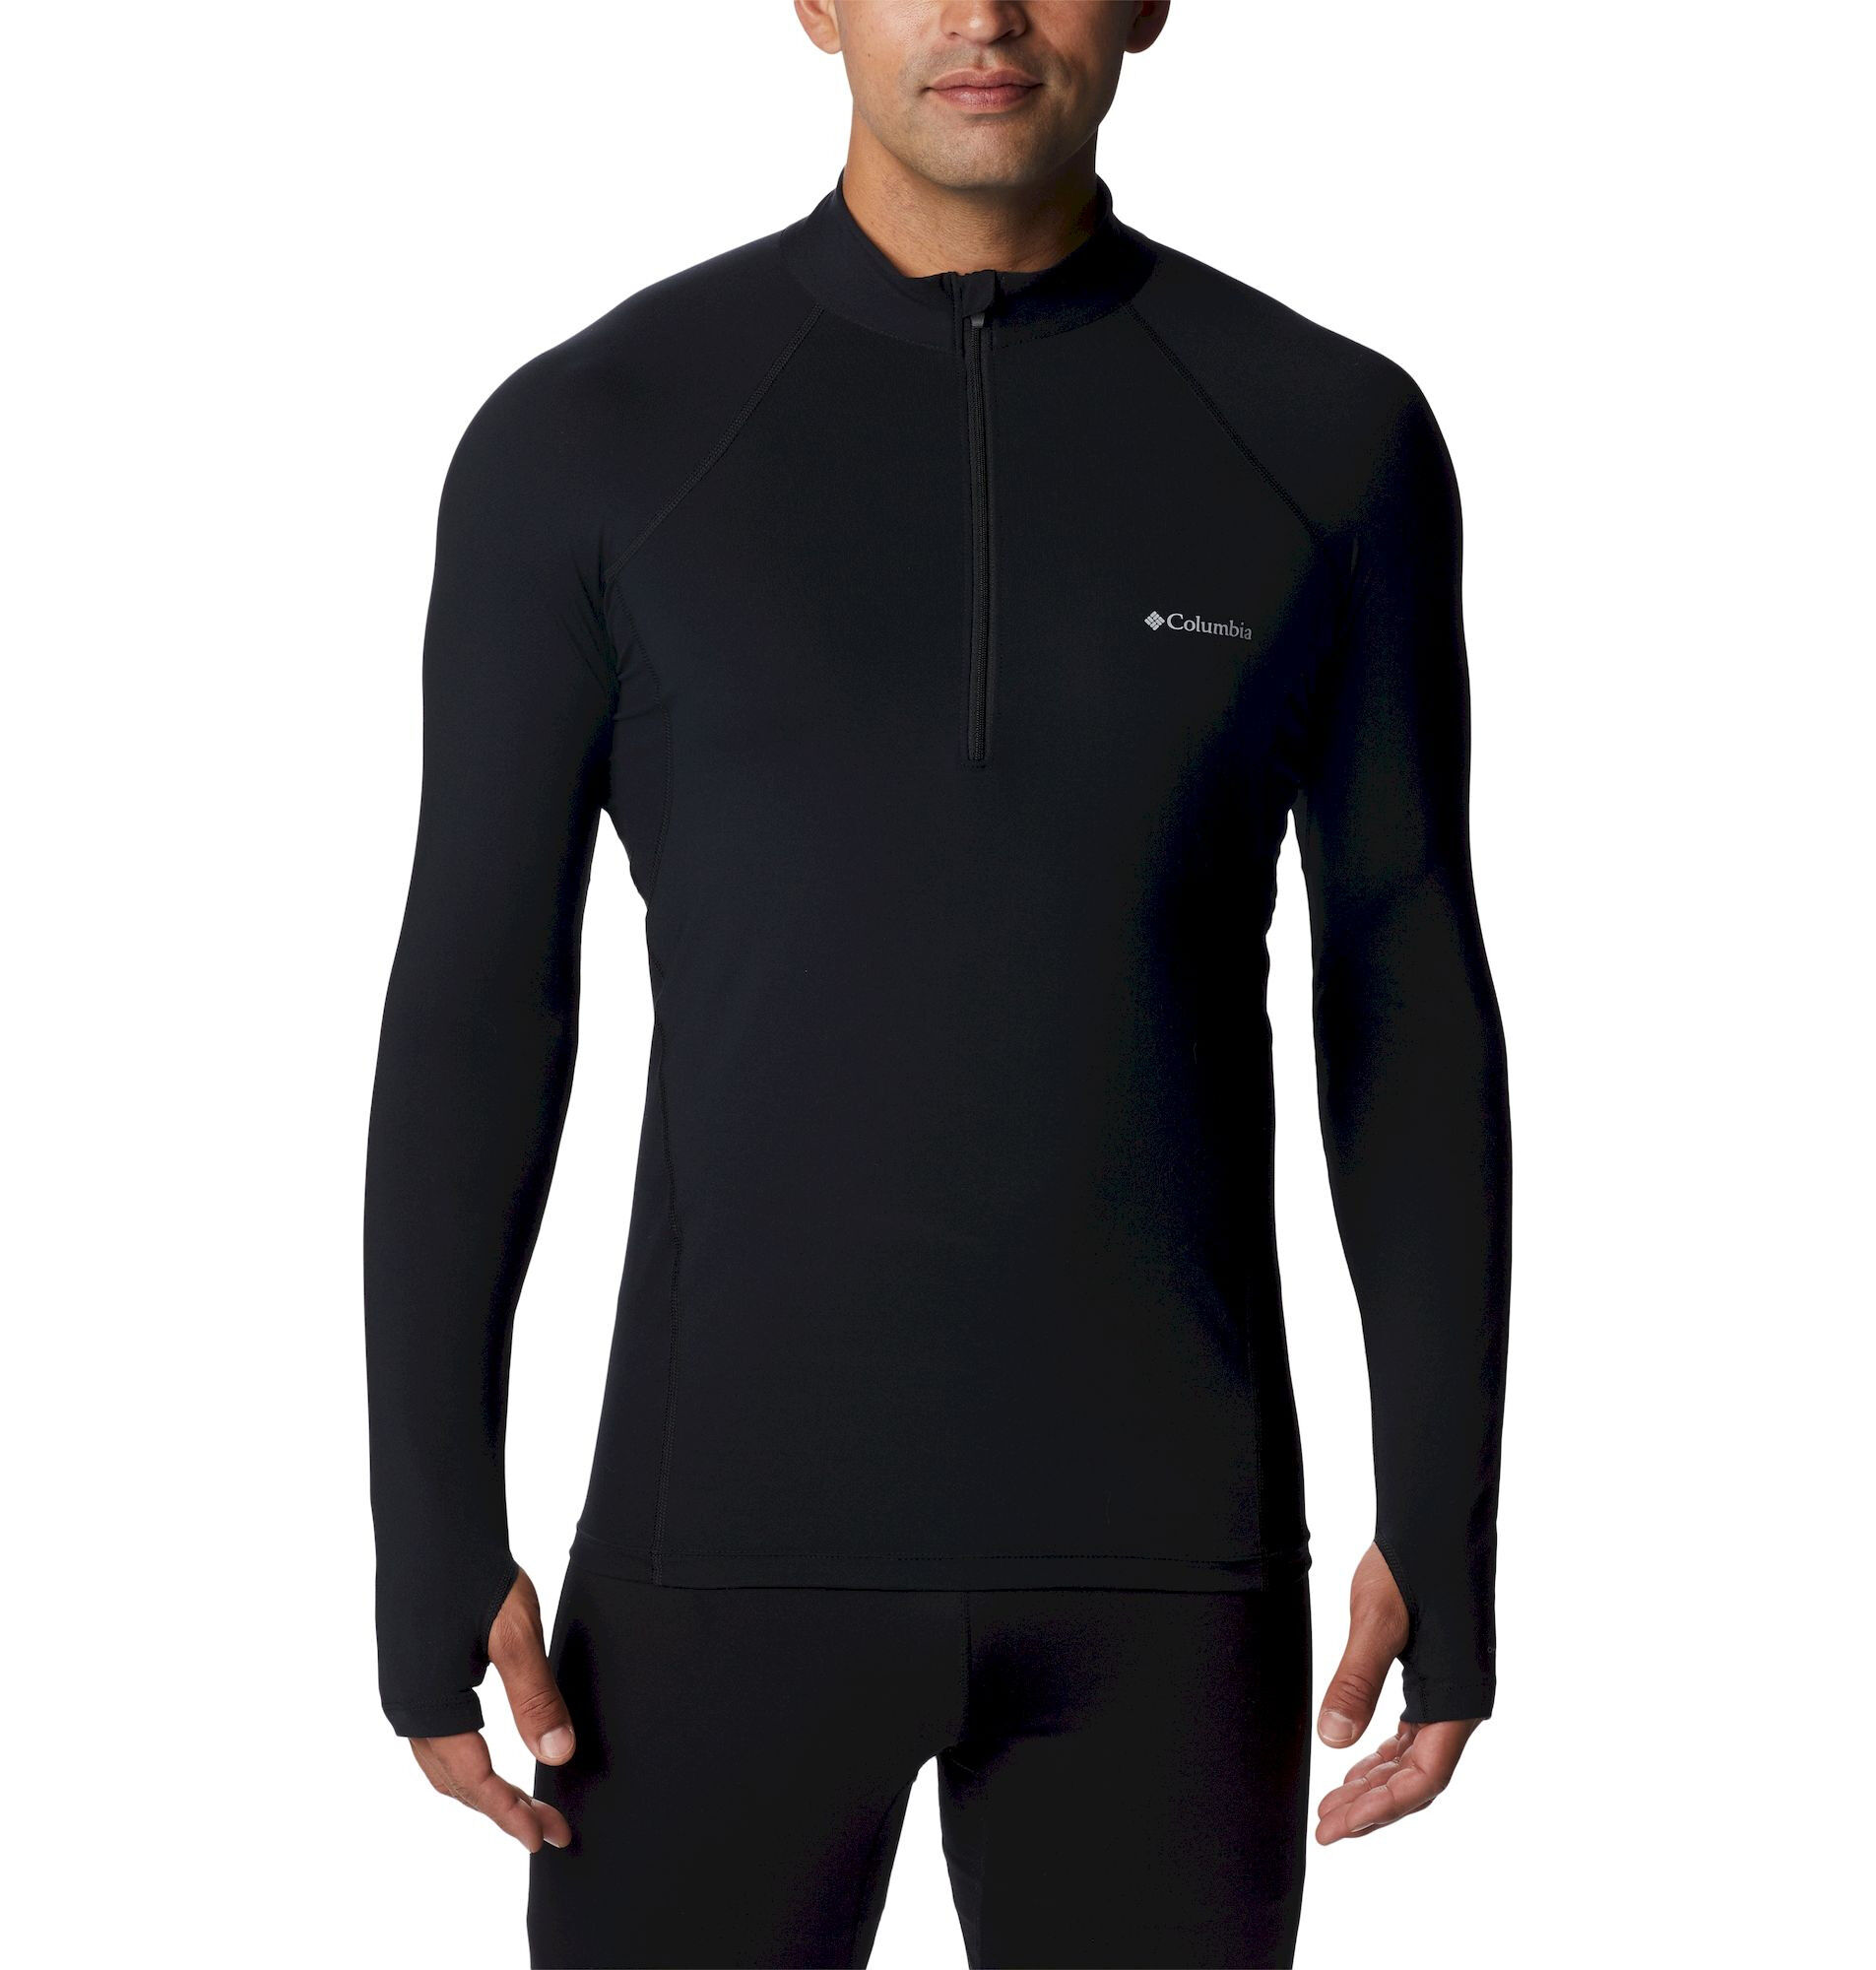 Columbia Midweight Stretch Long Sleeve Half Zip - Sous-vêtement thermique homme | Hardloop